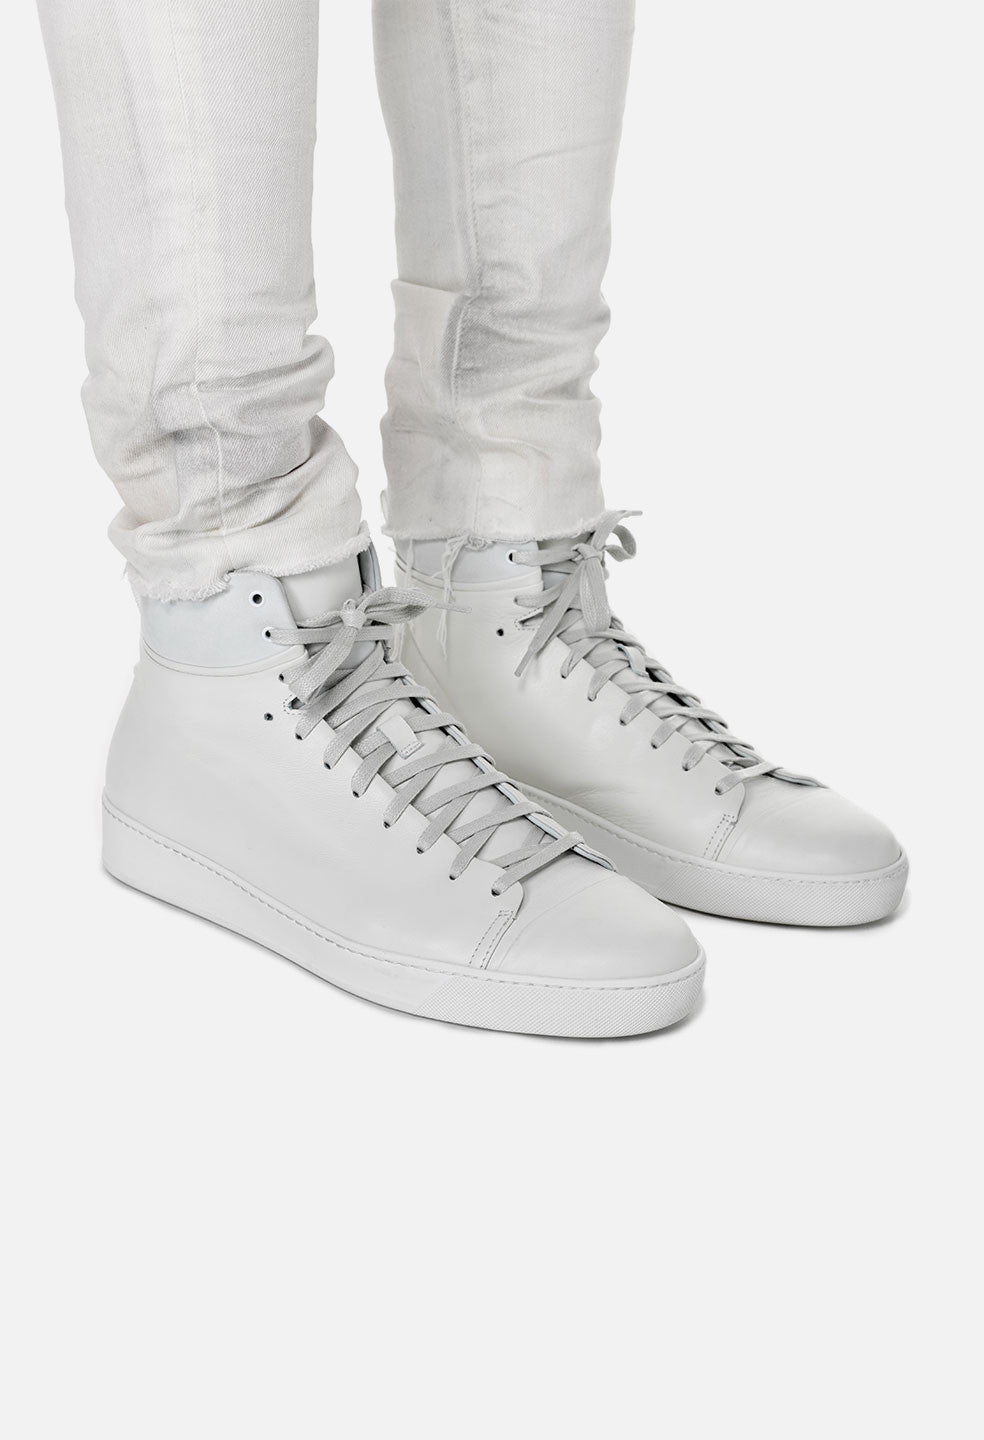 leather white high tops